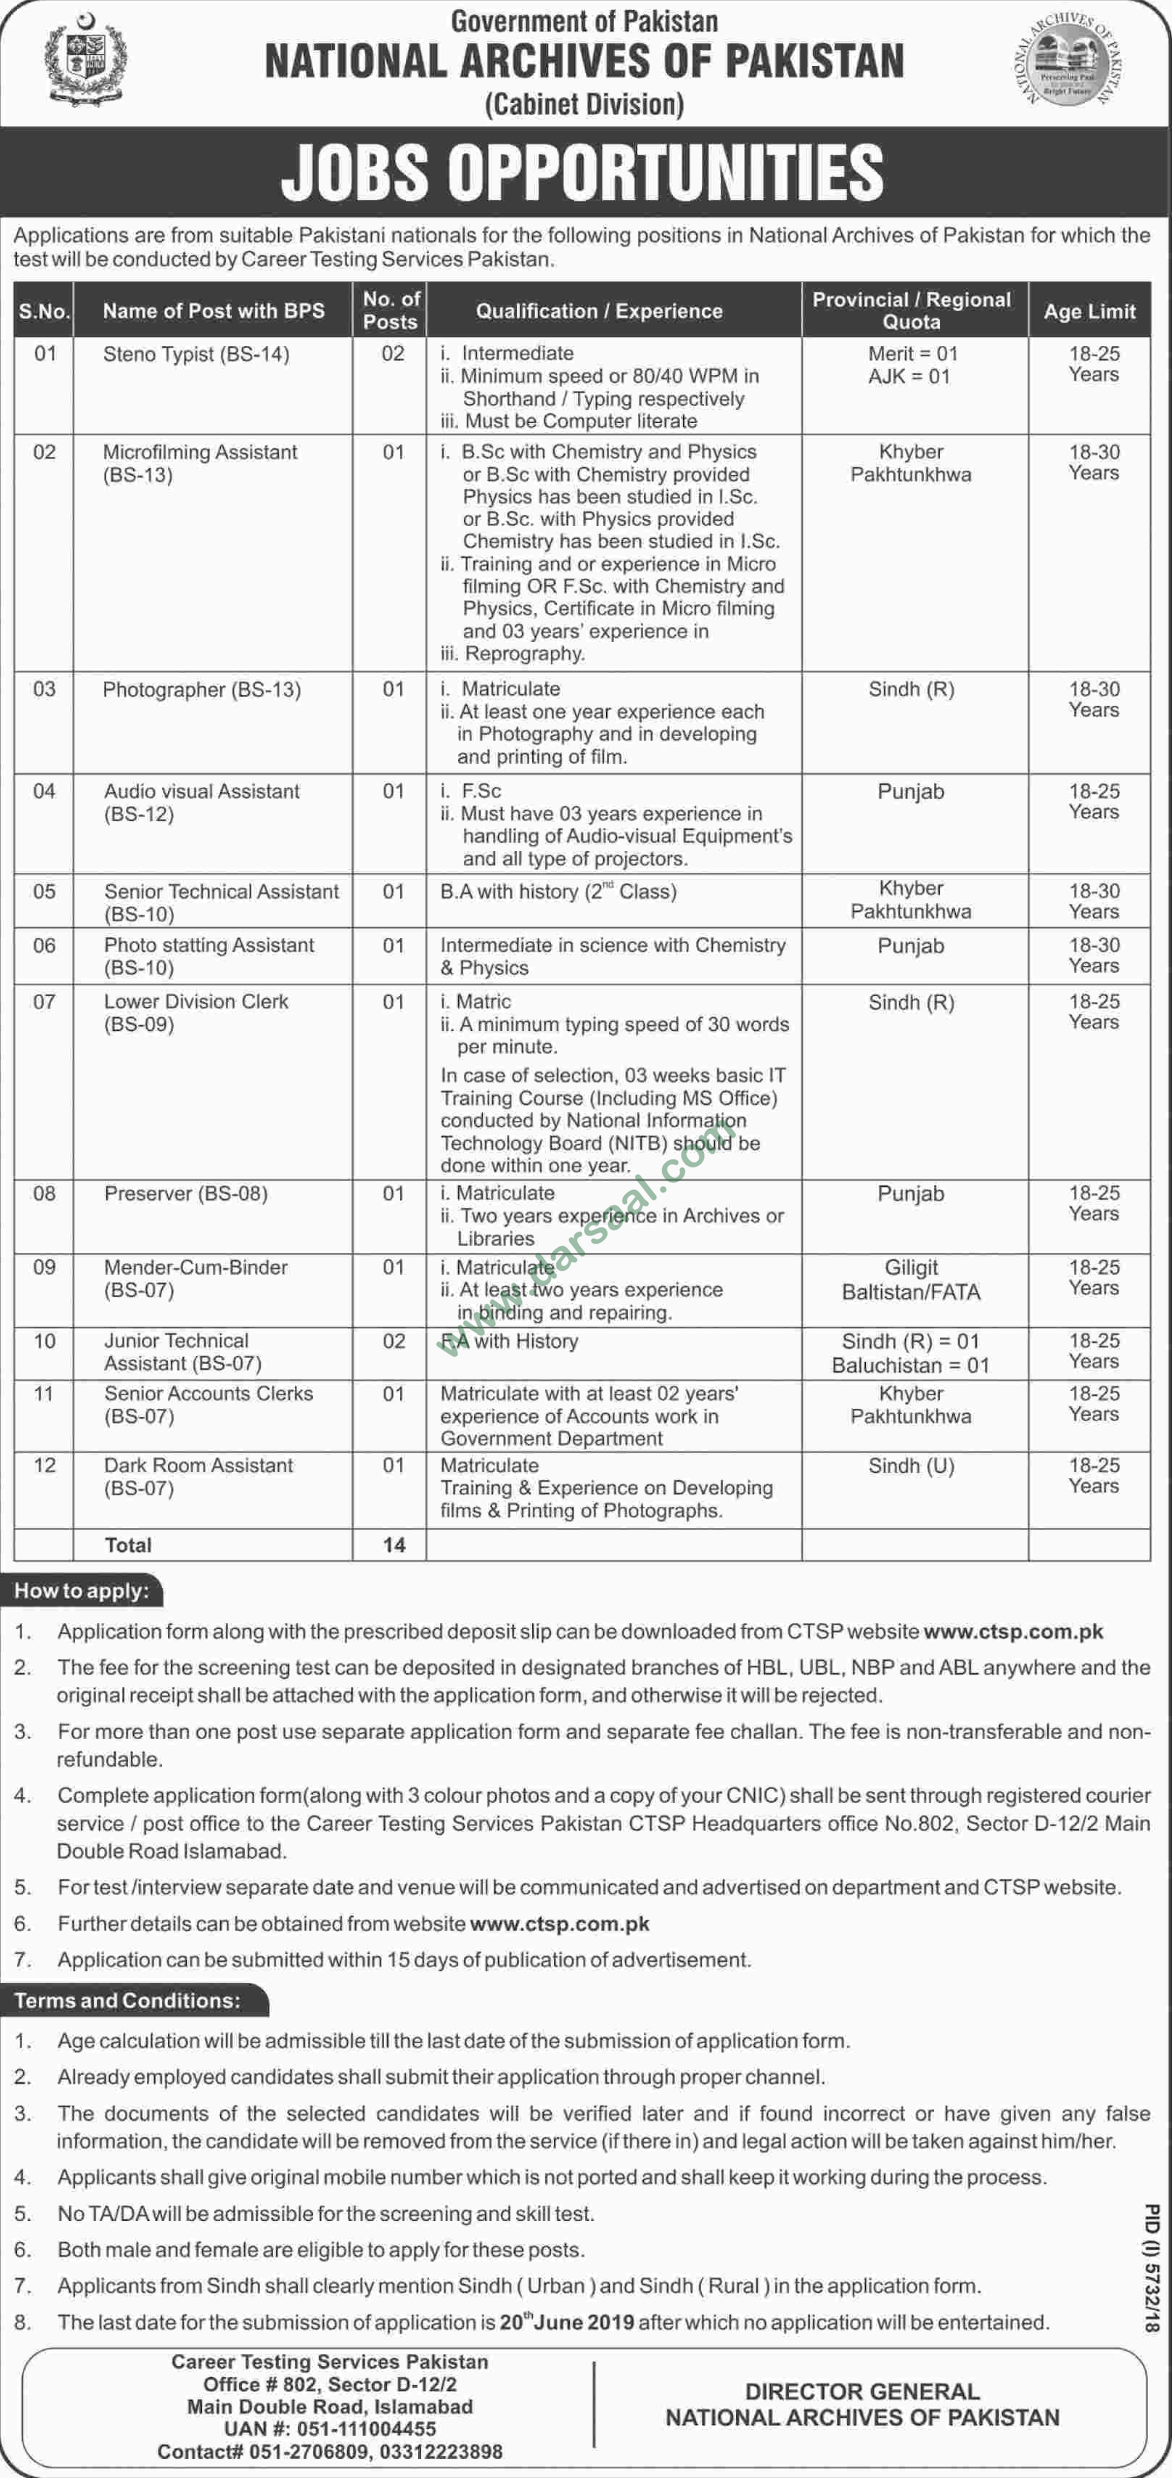 Photostatting Assistant Jobs in National Archives of Pakistan in Lahore - May 30, 2019